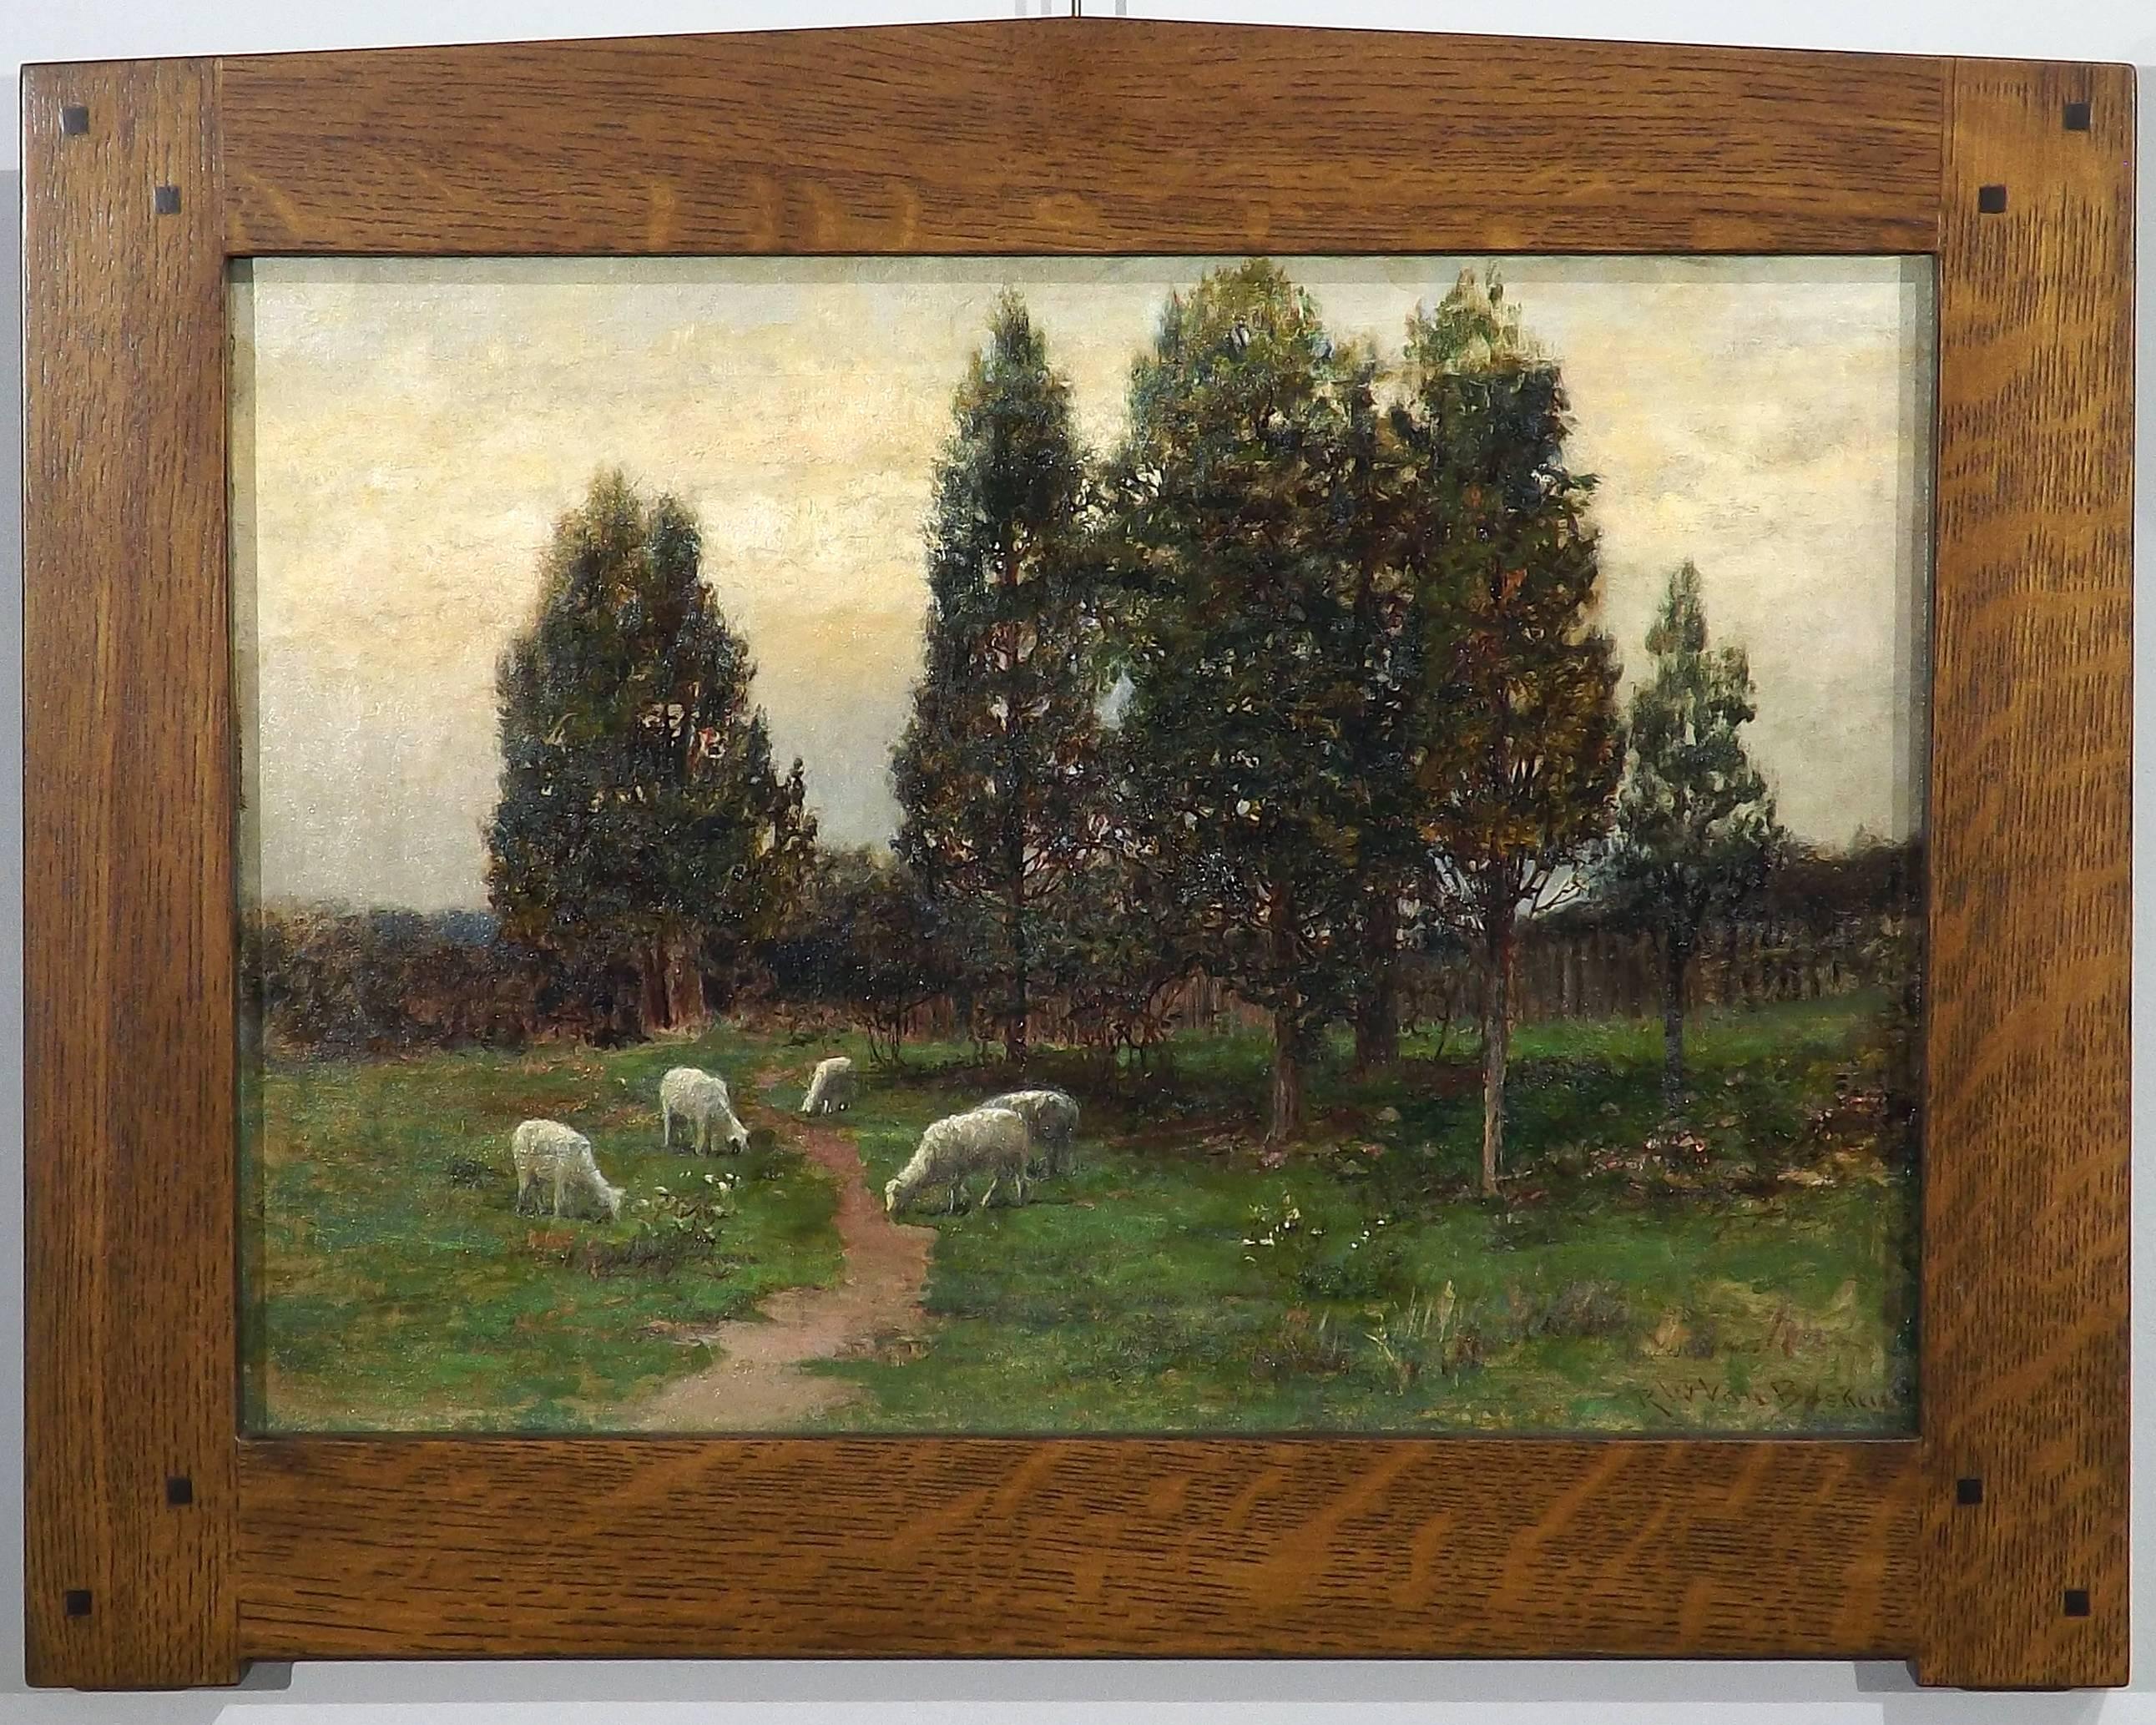 A group of sheep graze tranquilly upon the lush green grass and vibrant wildflowers near a small copse of trees. Overhead the early light of a spring day approaches in this fine painting by Robert Ward van Boskerck. Beautifully framed in a